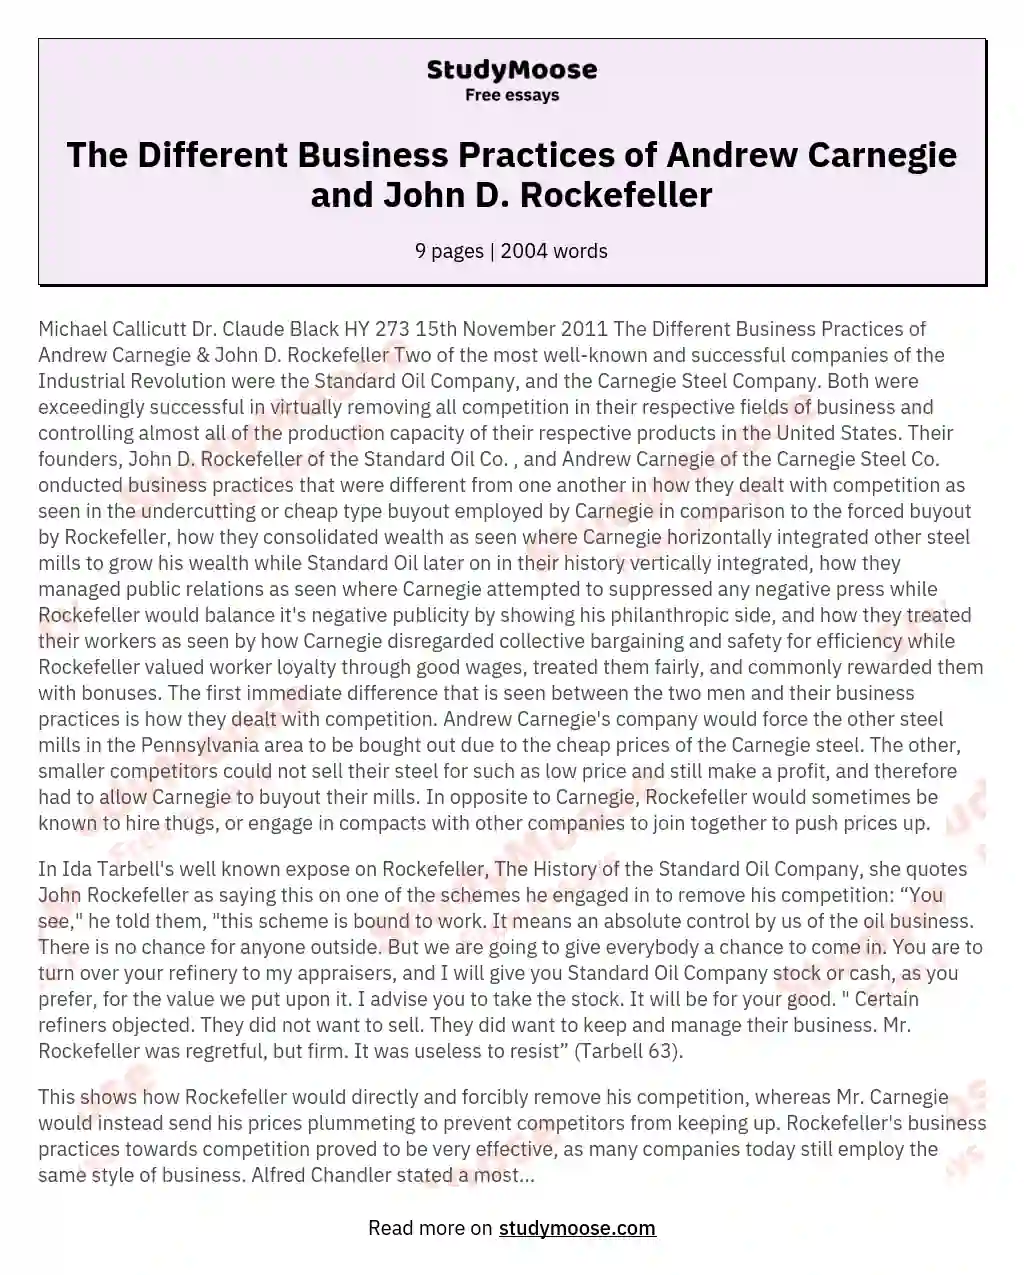 The Different Business Practices of Andrew Carnegie and John D. Rockefeller